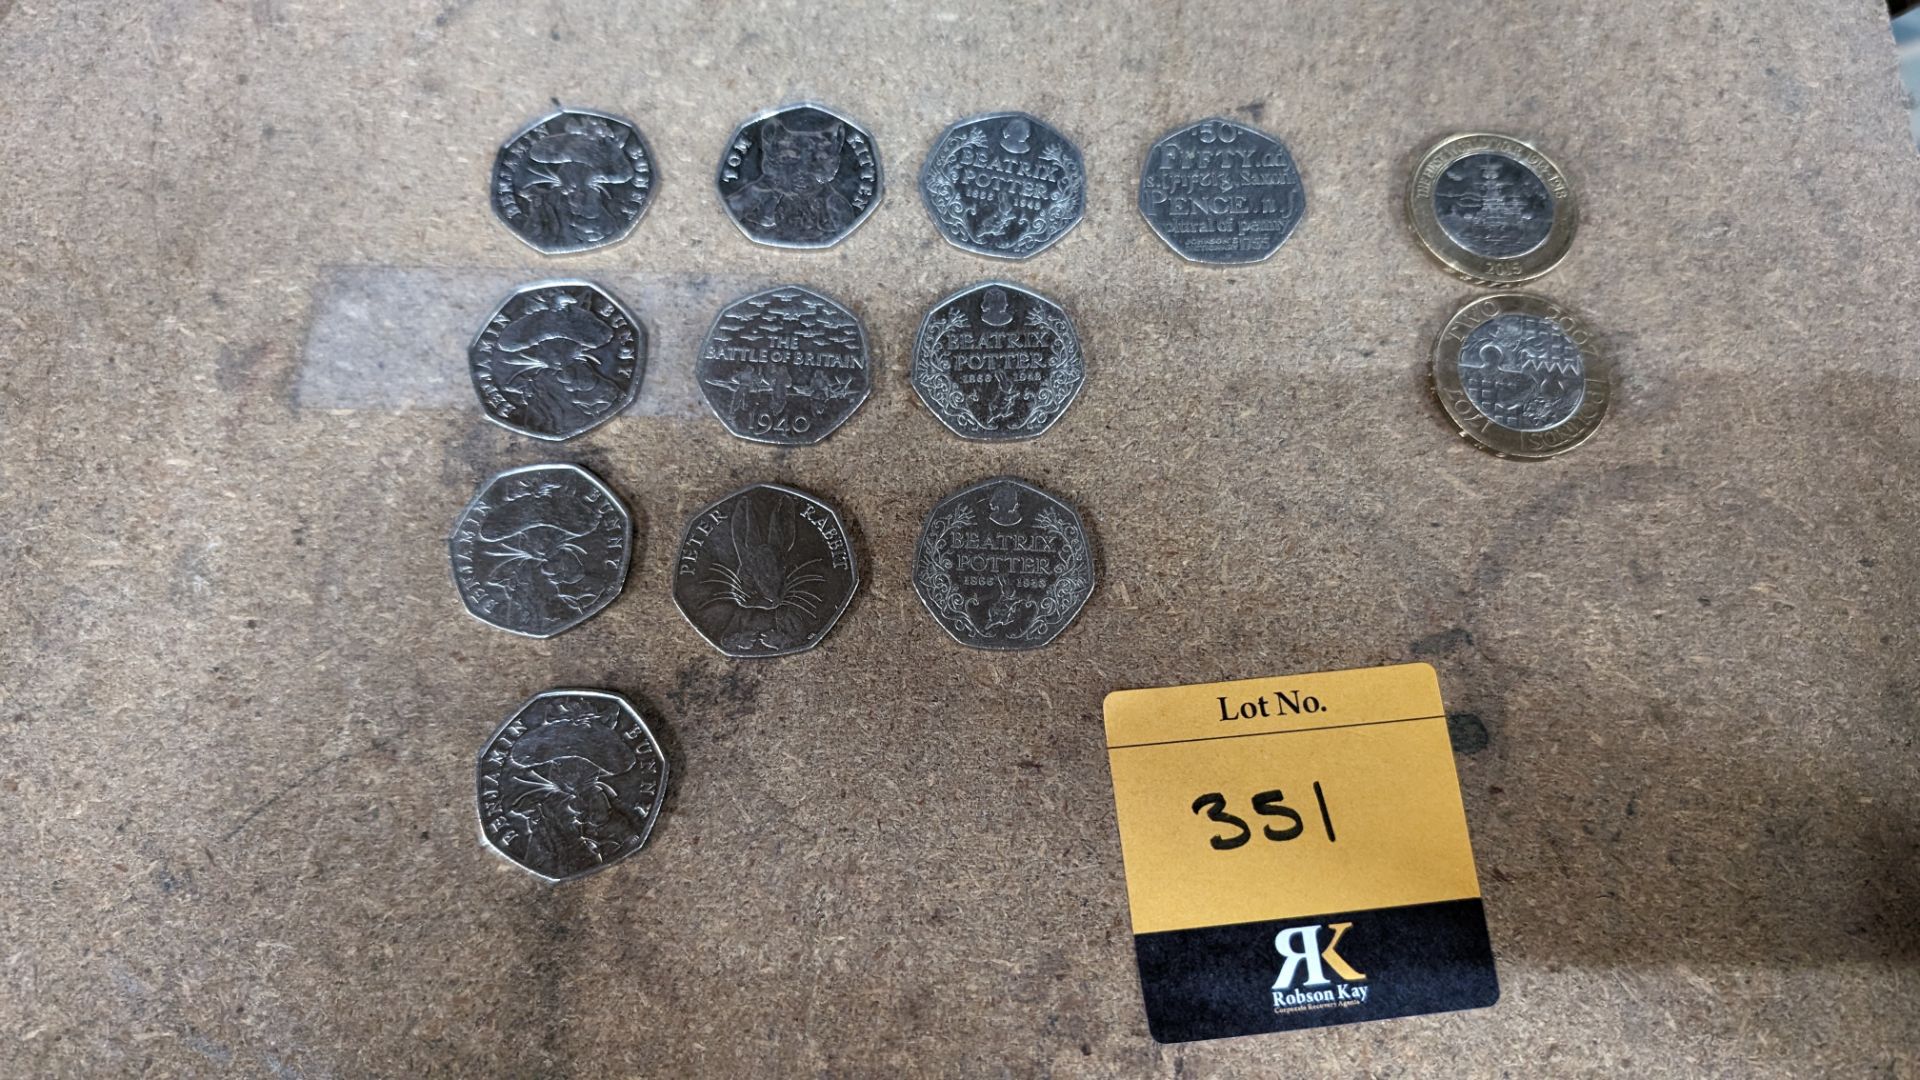 13 assorted 50p & other limited edition coins